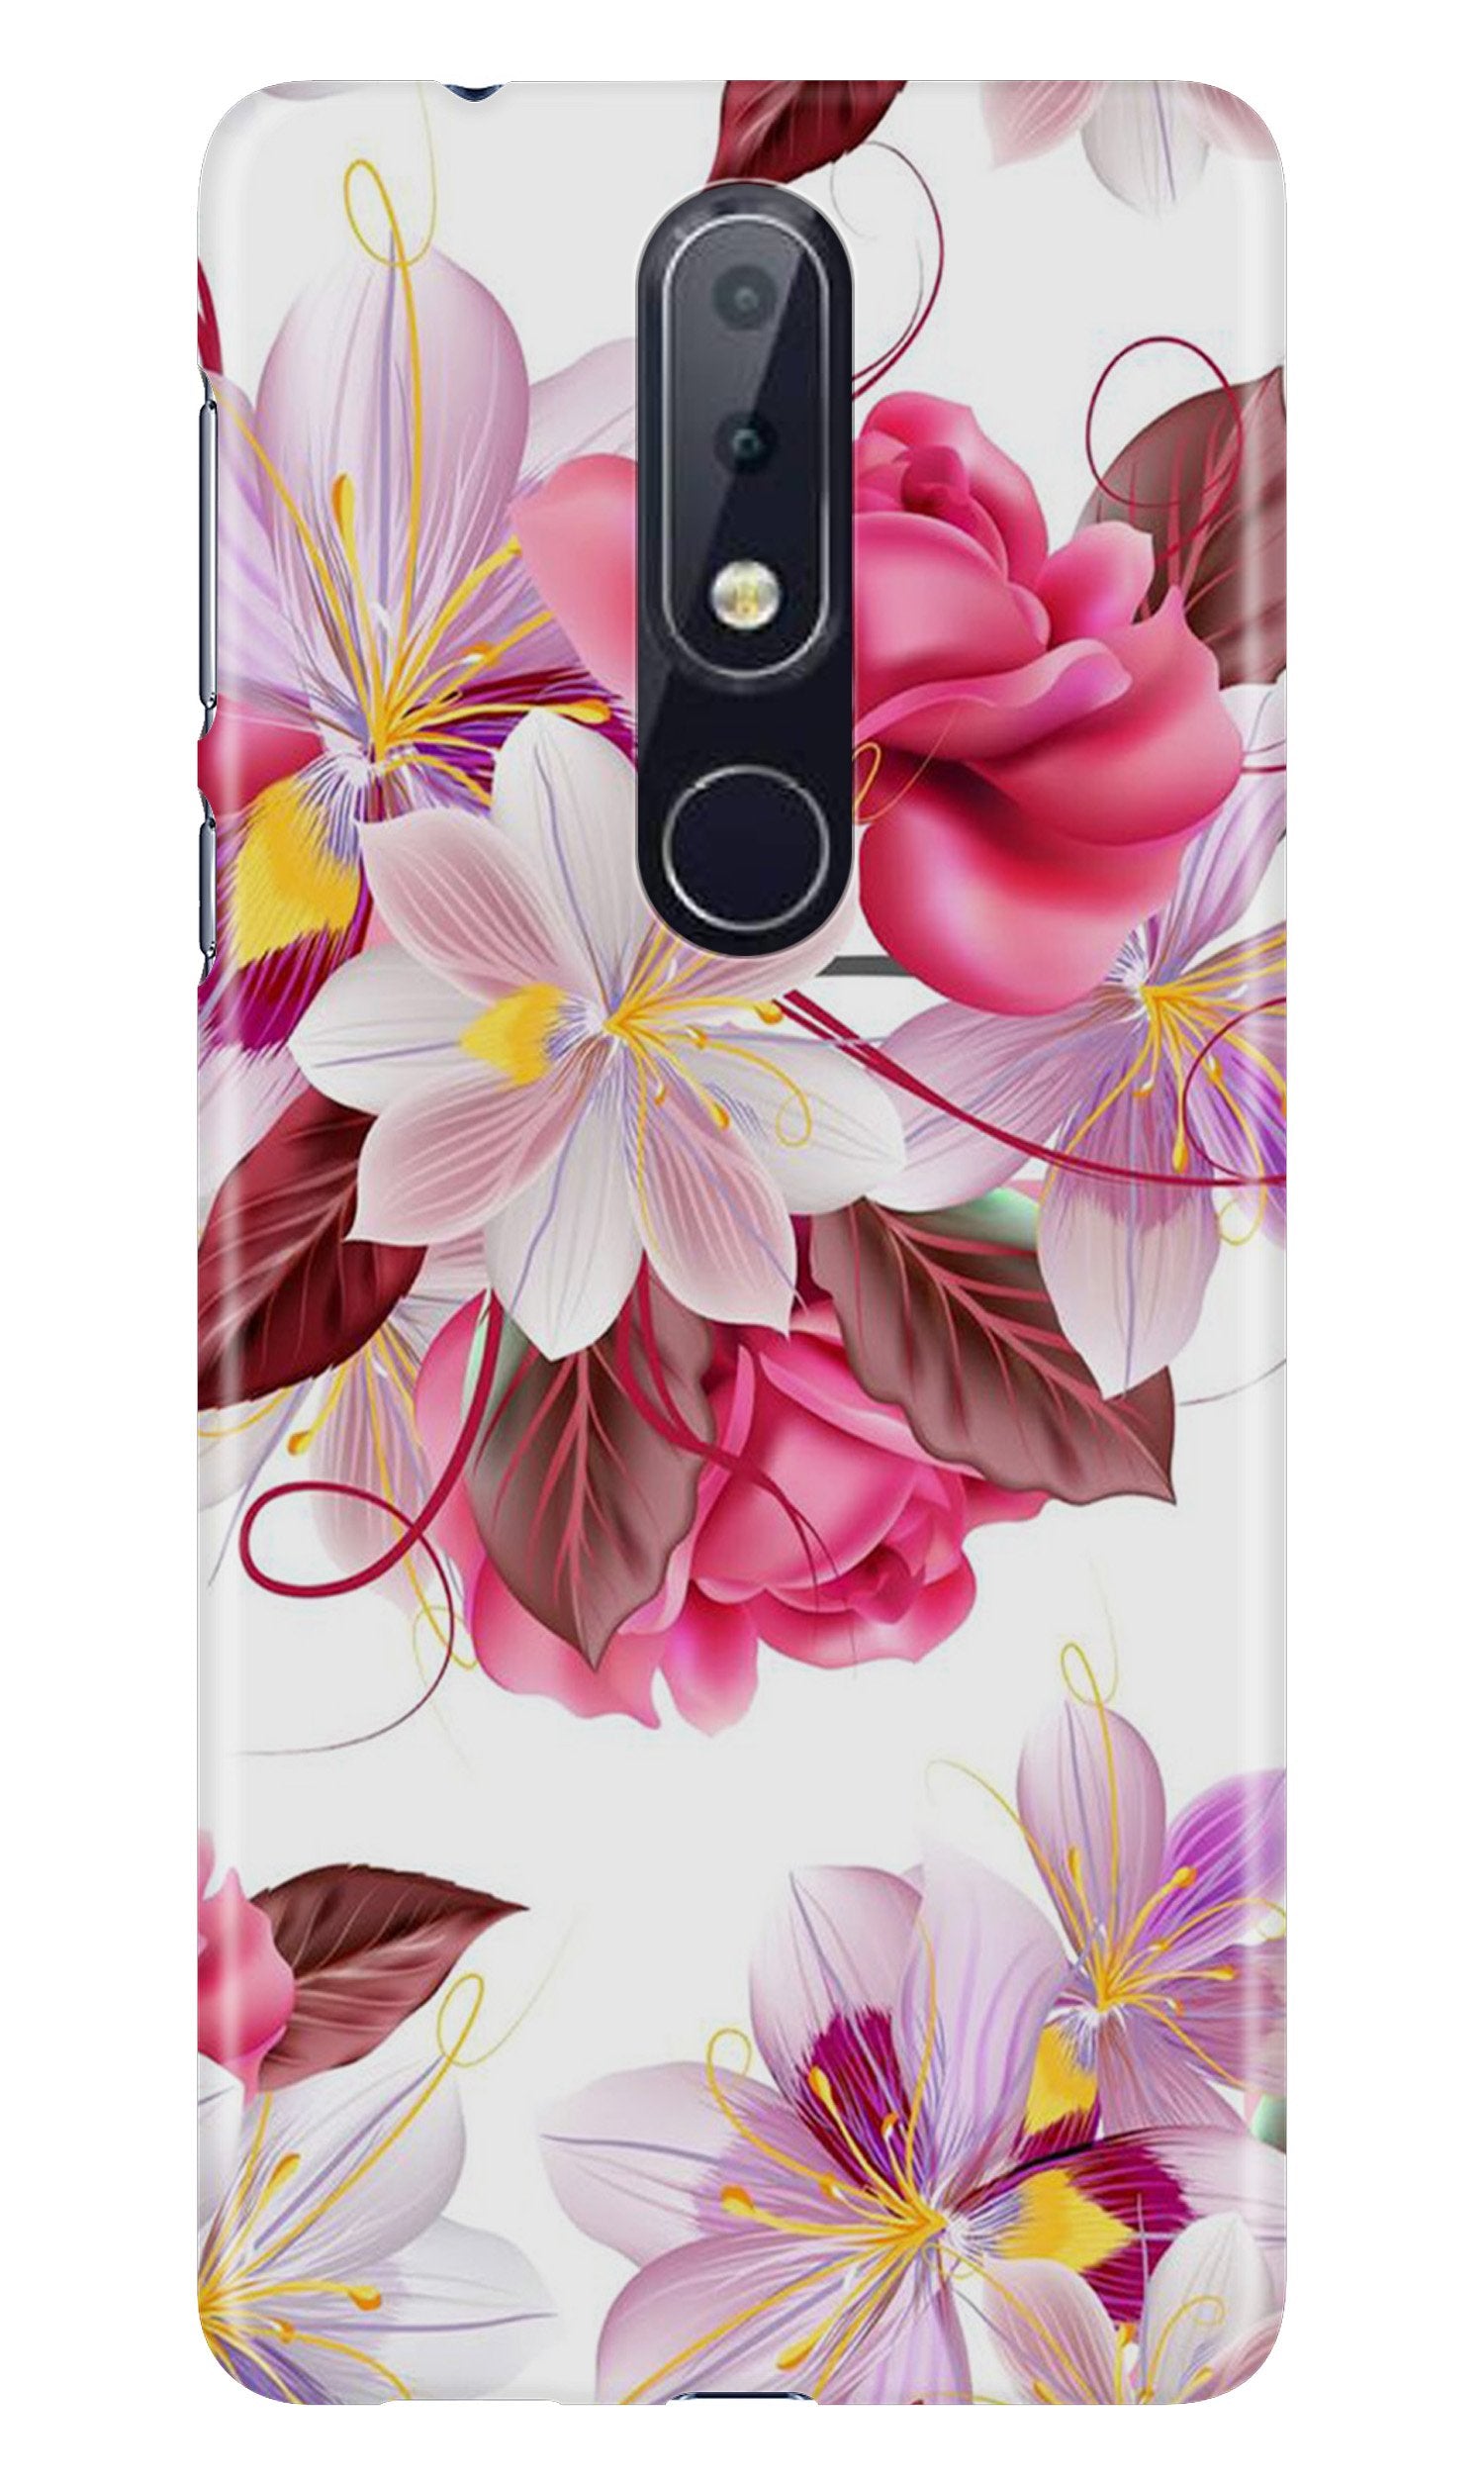 Beautiful flowers Case for Nokia 4.2